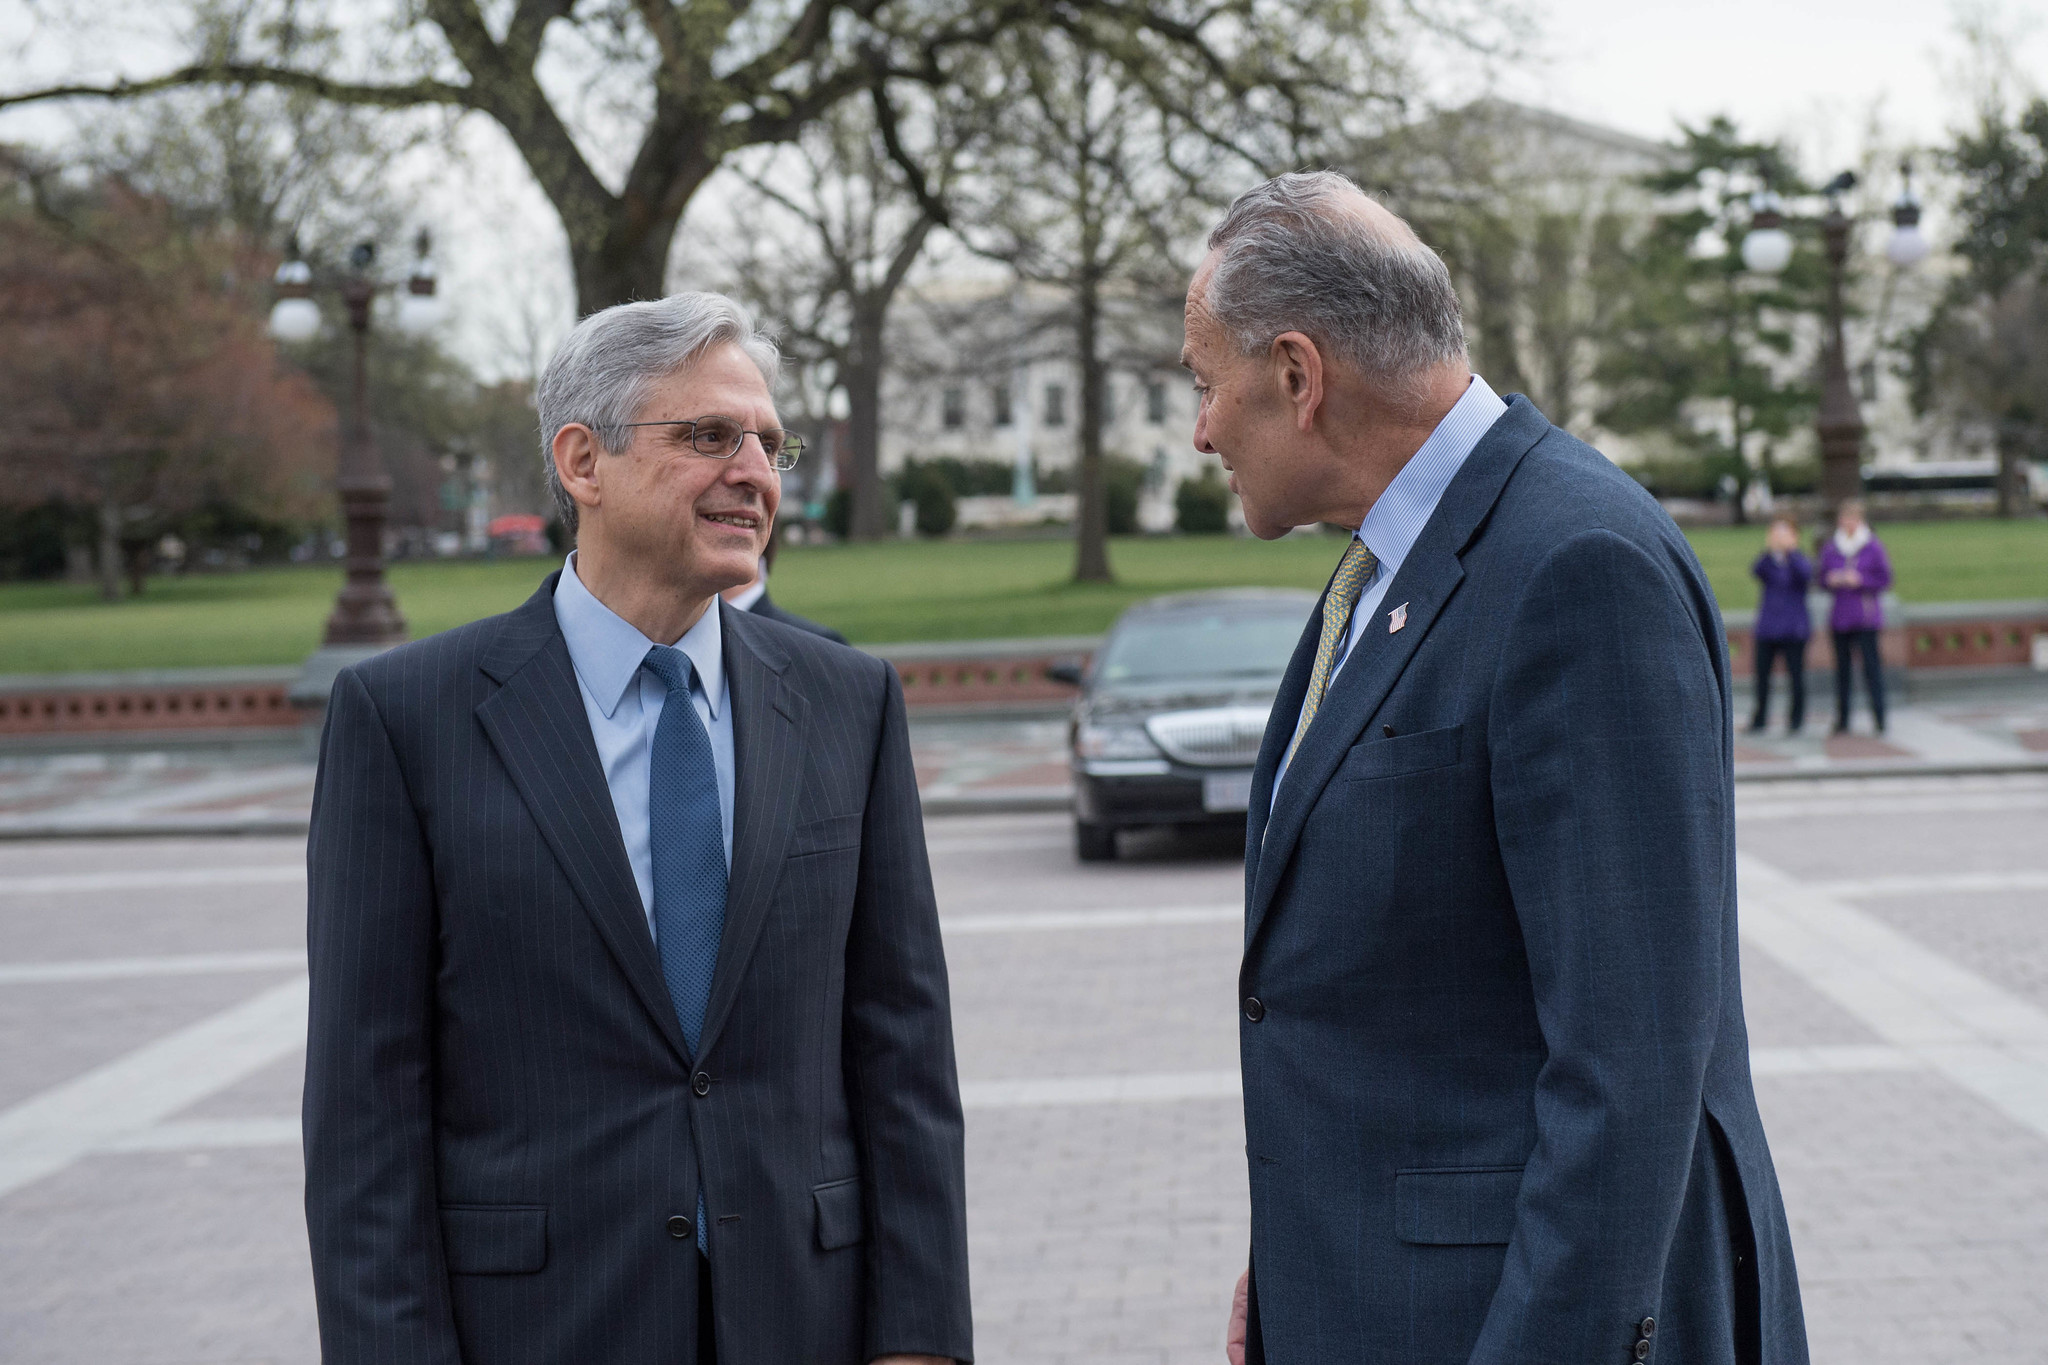 Why Is Merrick Garland Sticking with Donald Trump on Climate Lawsuits?